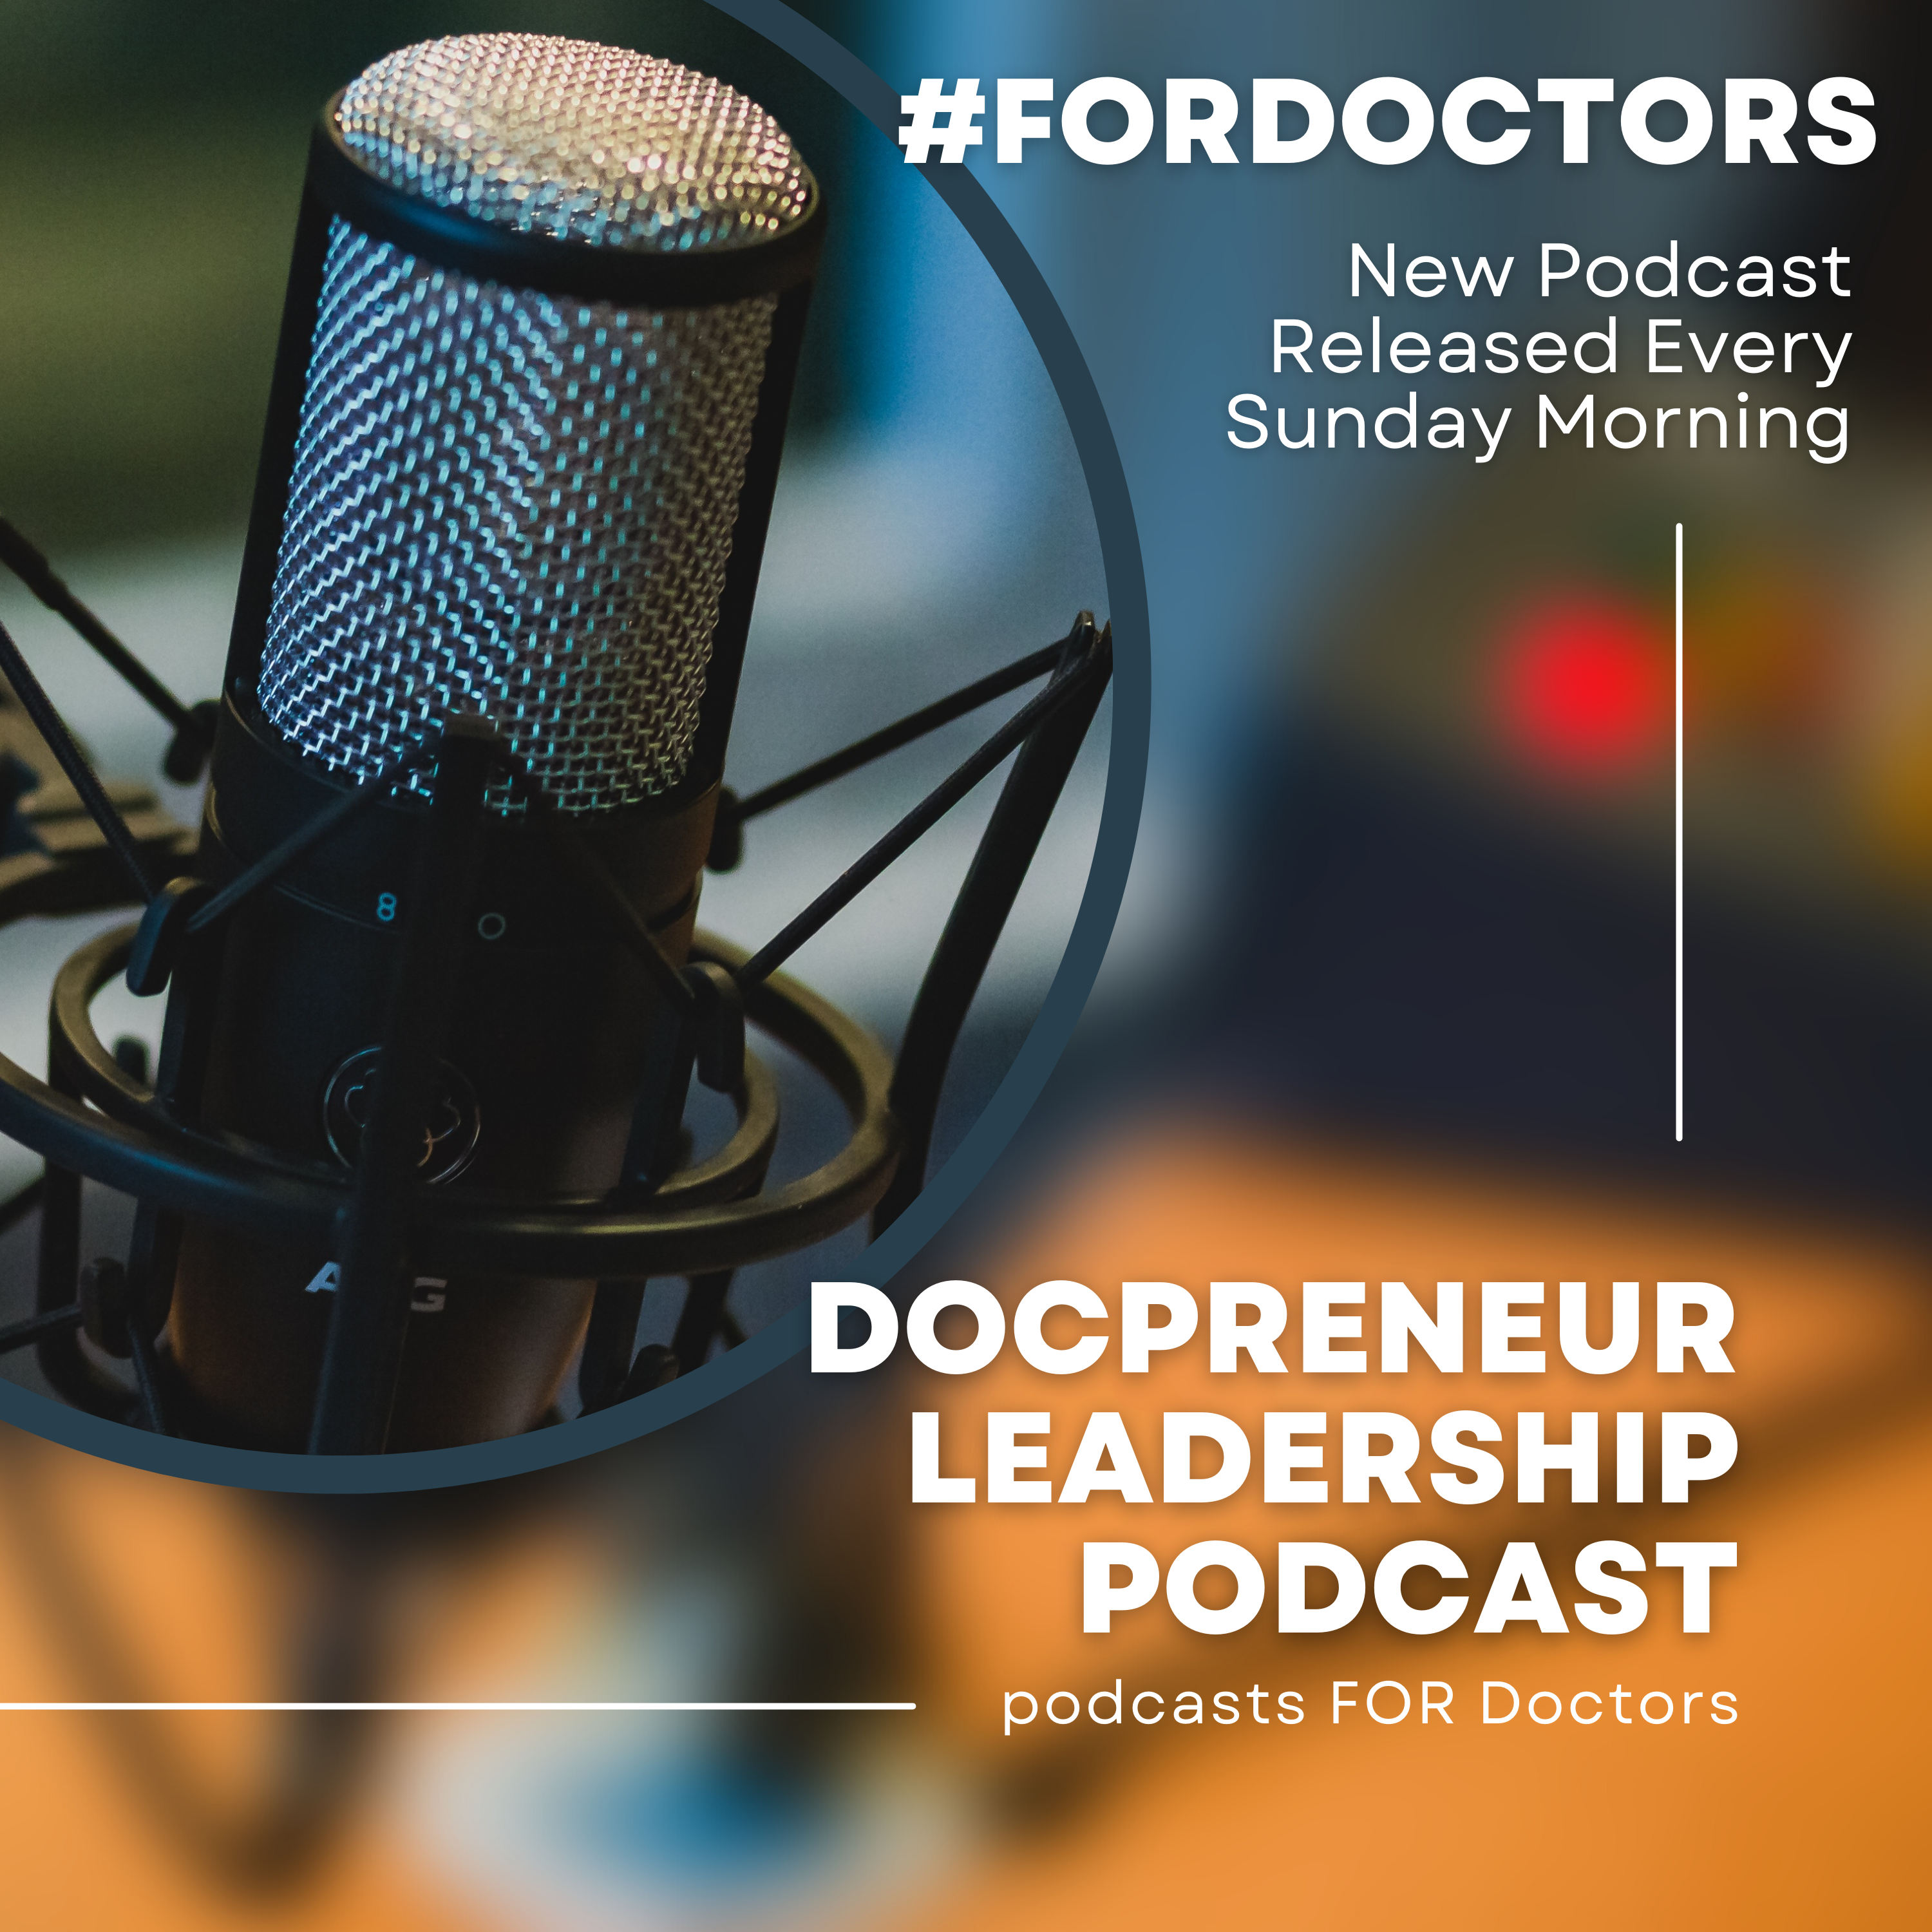 Meet Dr. Justin Graham | (Podcast) Empathic, intuitive AI technology FOR Patients” [The DocPreneur Leadership Podcast]